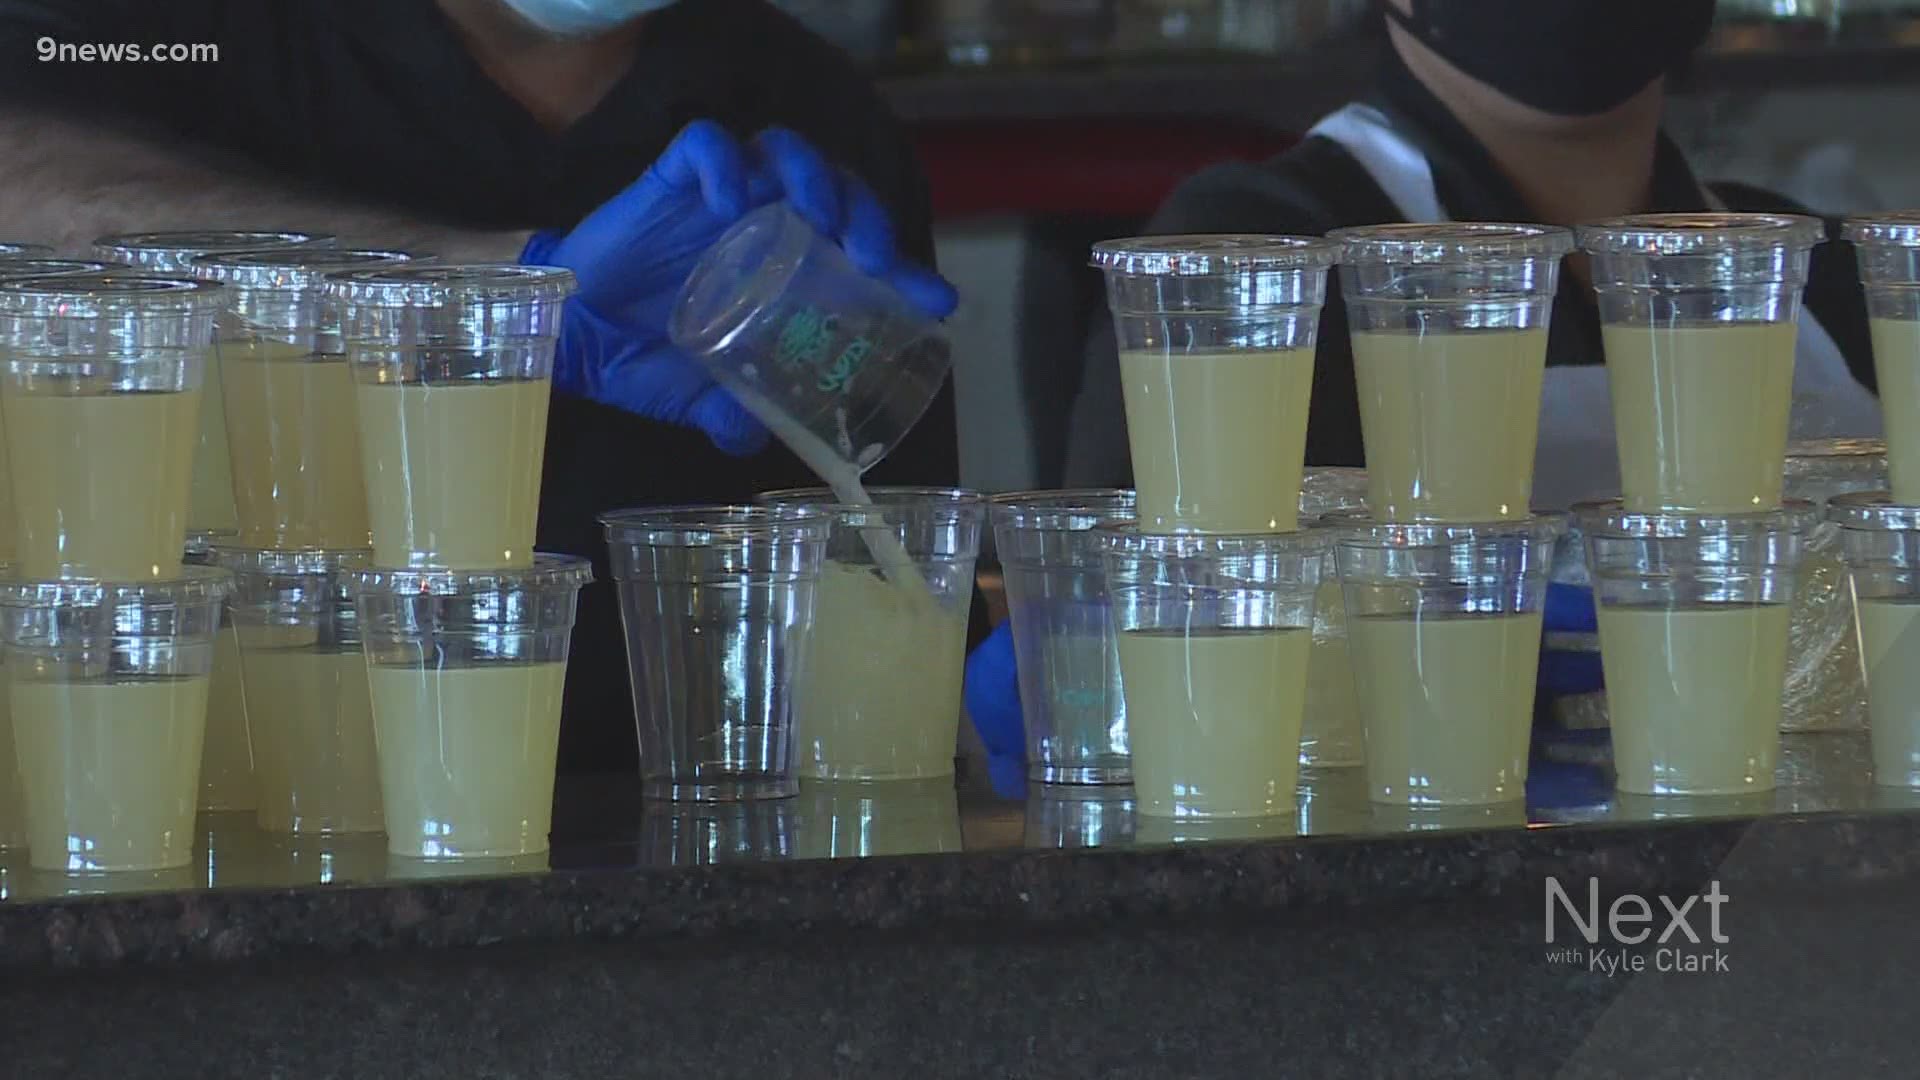 Gov. Polis' executive order allowed restaurants to serve takeout and delivery alcohol. State lawmakers are looking at keeping that and it could impact liquor stores.